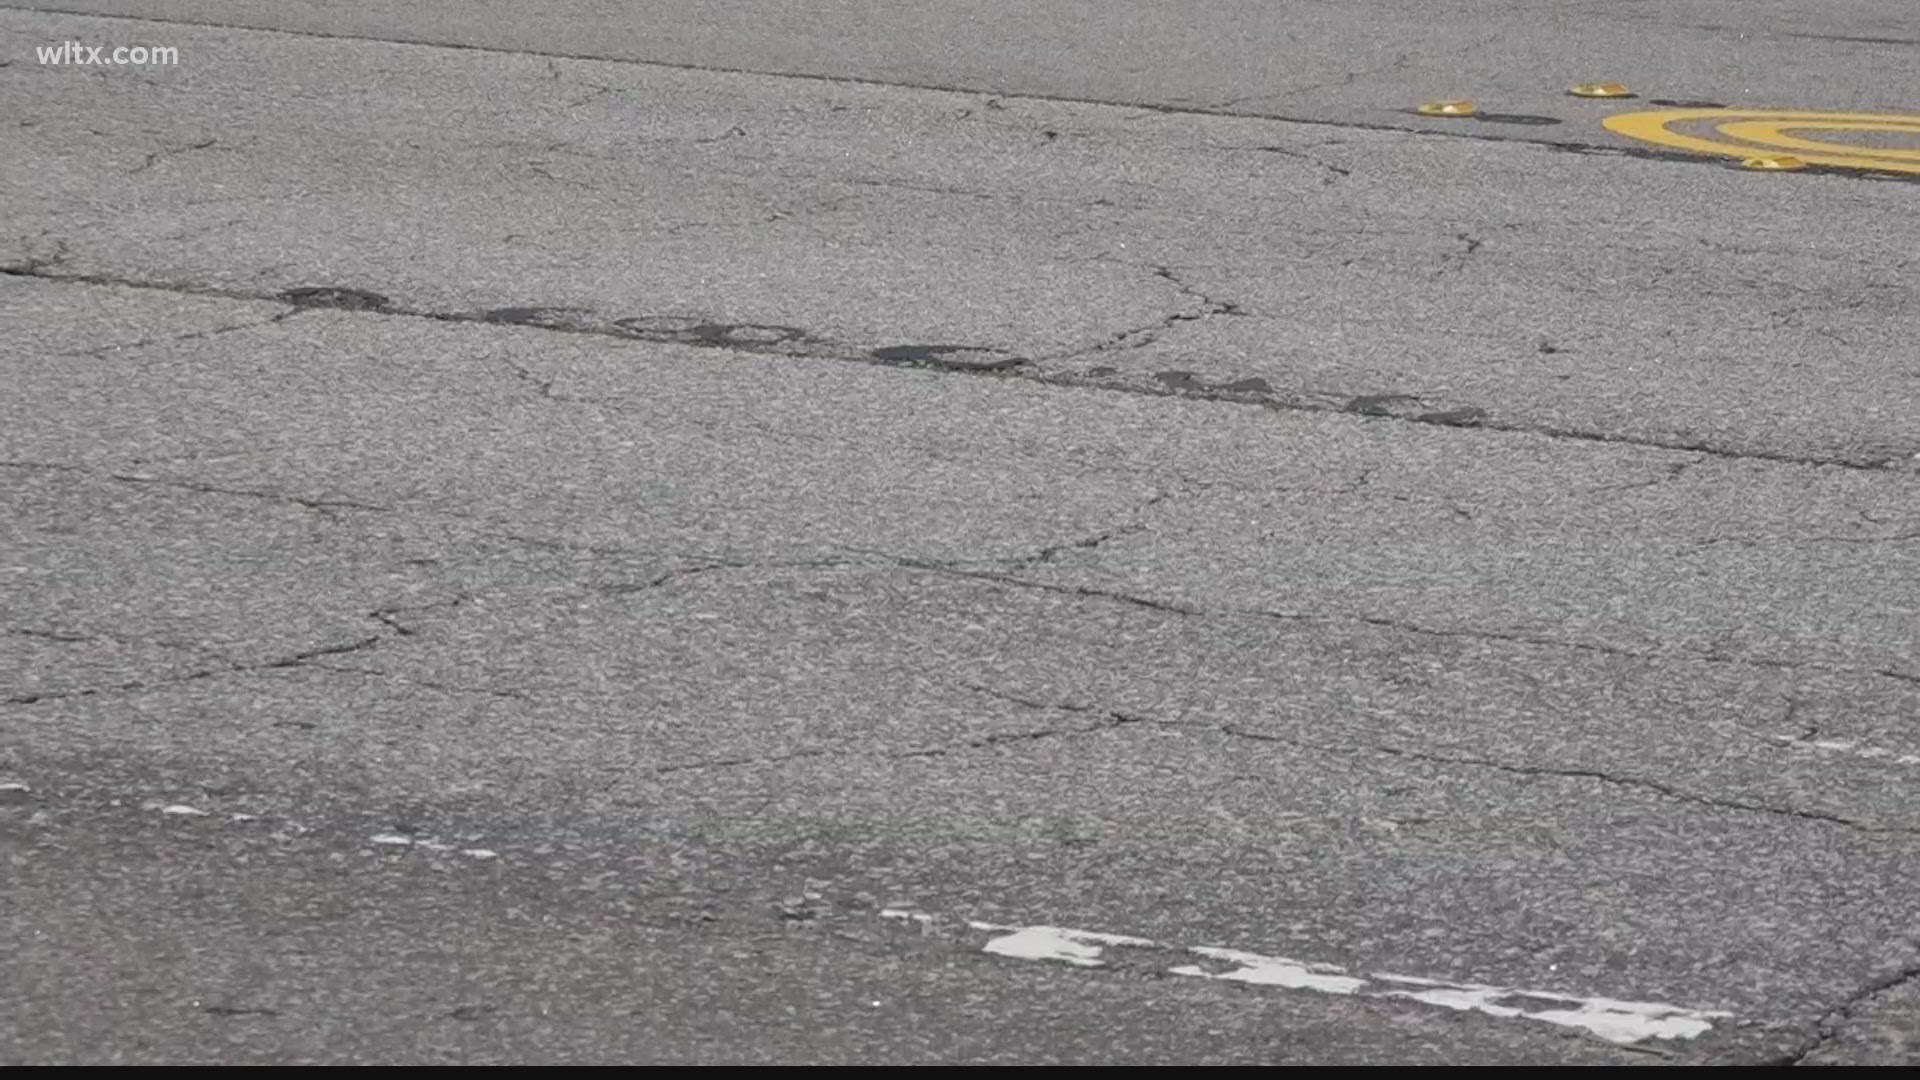 More than $300 million in road improvements is headed to South Carolina as part of the new state budget.